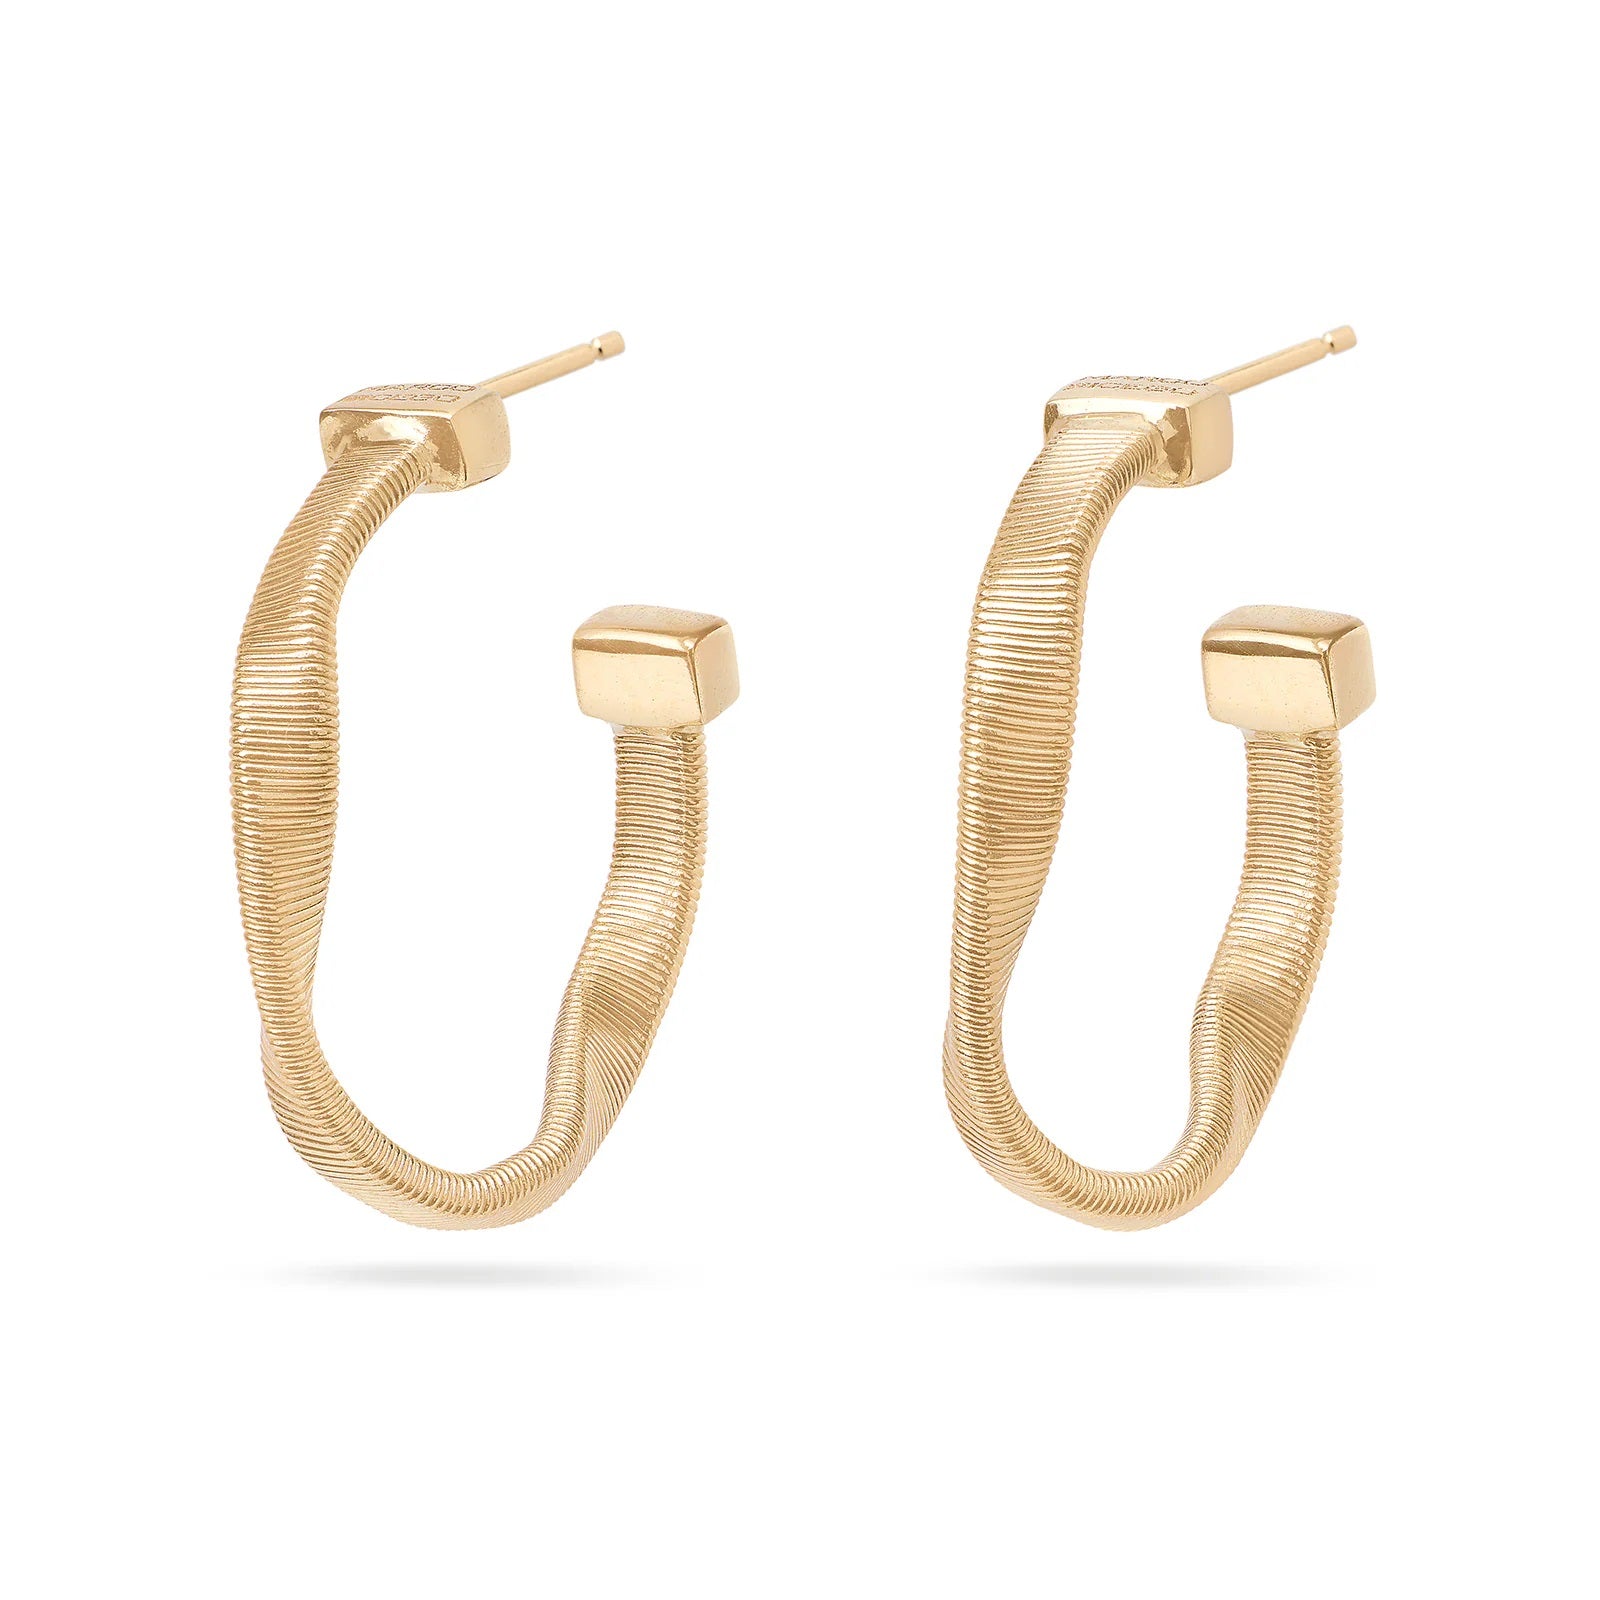 18K YELLOW GOLD SMALL HOOP EARRINGS FROM THE MARRAKECH COLLECTION